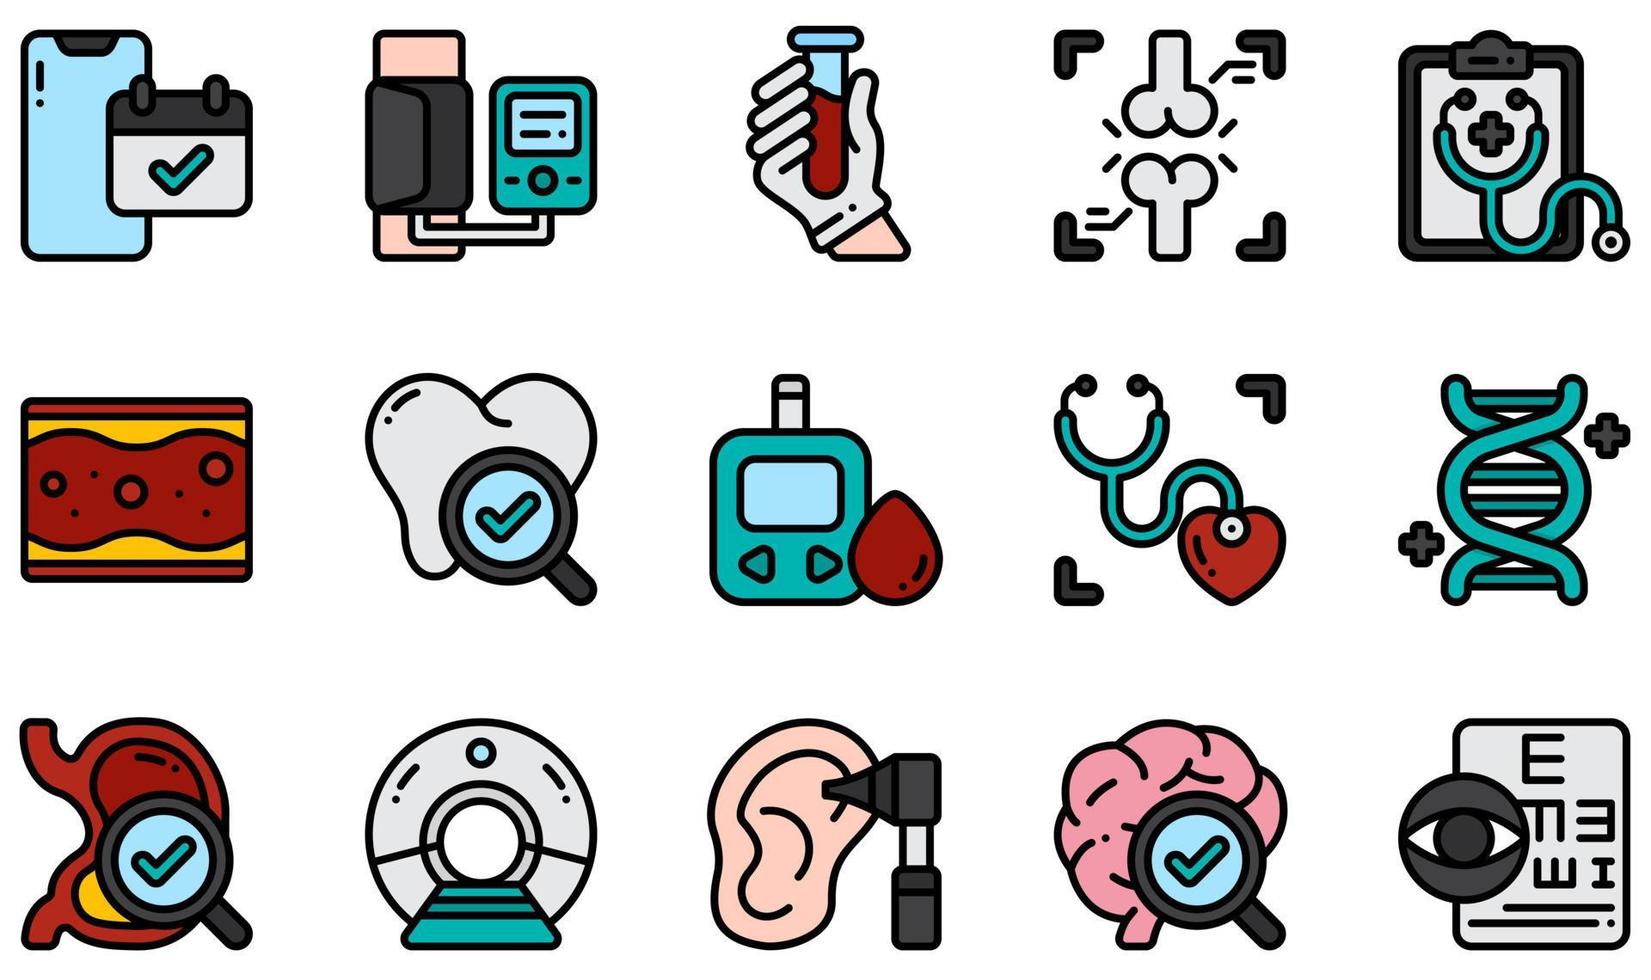 Set of Vector Icons Related to Health Checkup. Contains such Icons as Appointment, Blood Pressure, Blood Test, Checkup, Heart Check, Eye Exam and more.